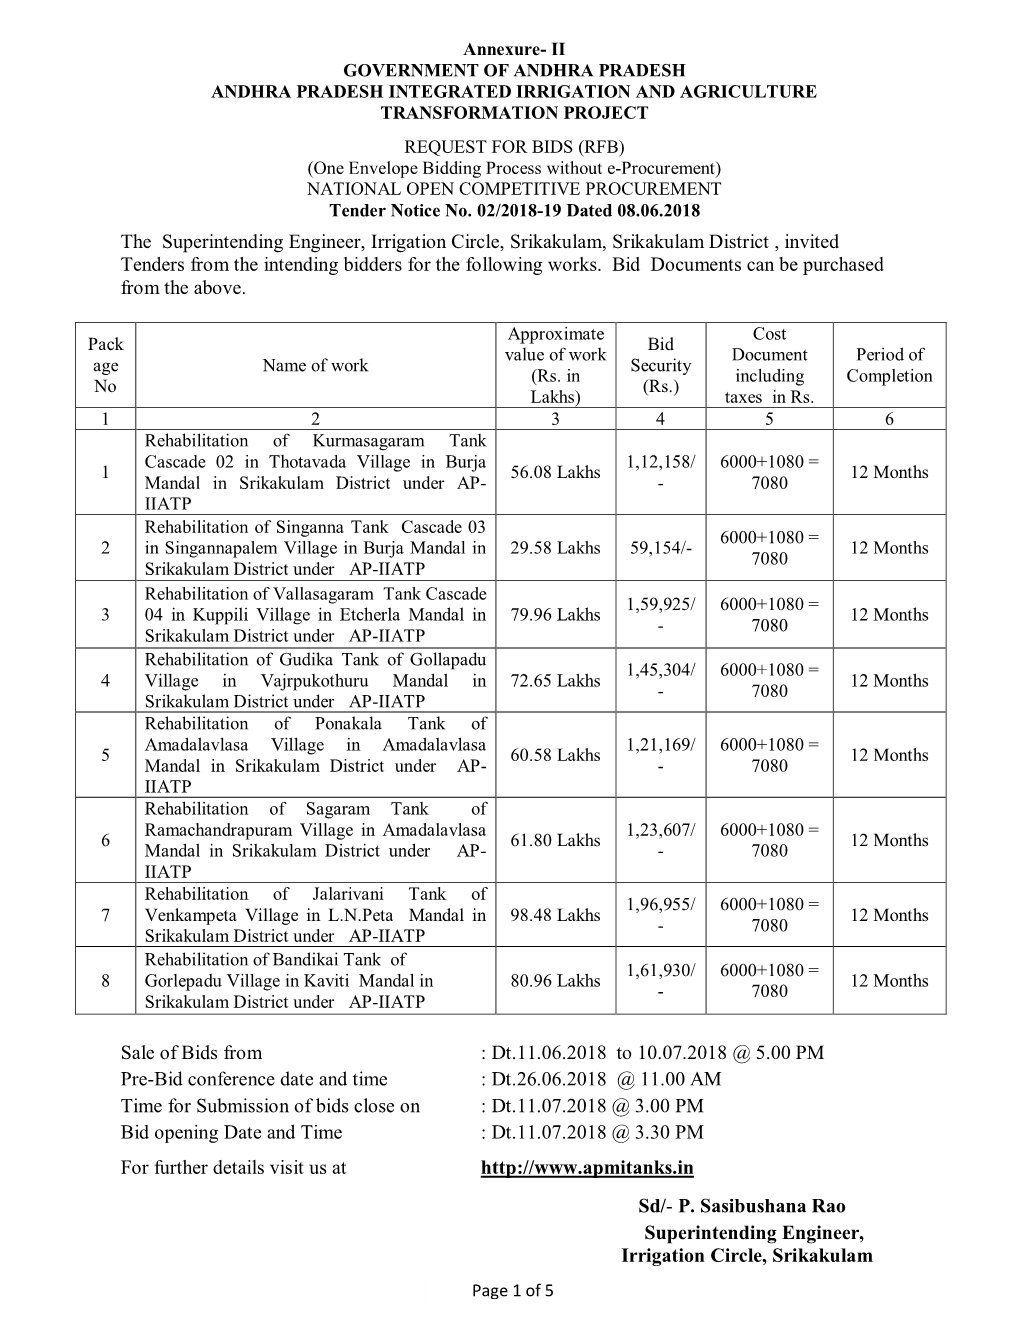 The Superintending Engineer, Irrigation Circle, Srikakulam, Srikakulam District , Invited Tenders from the Intending Bidders for the Following Works